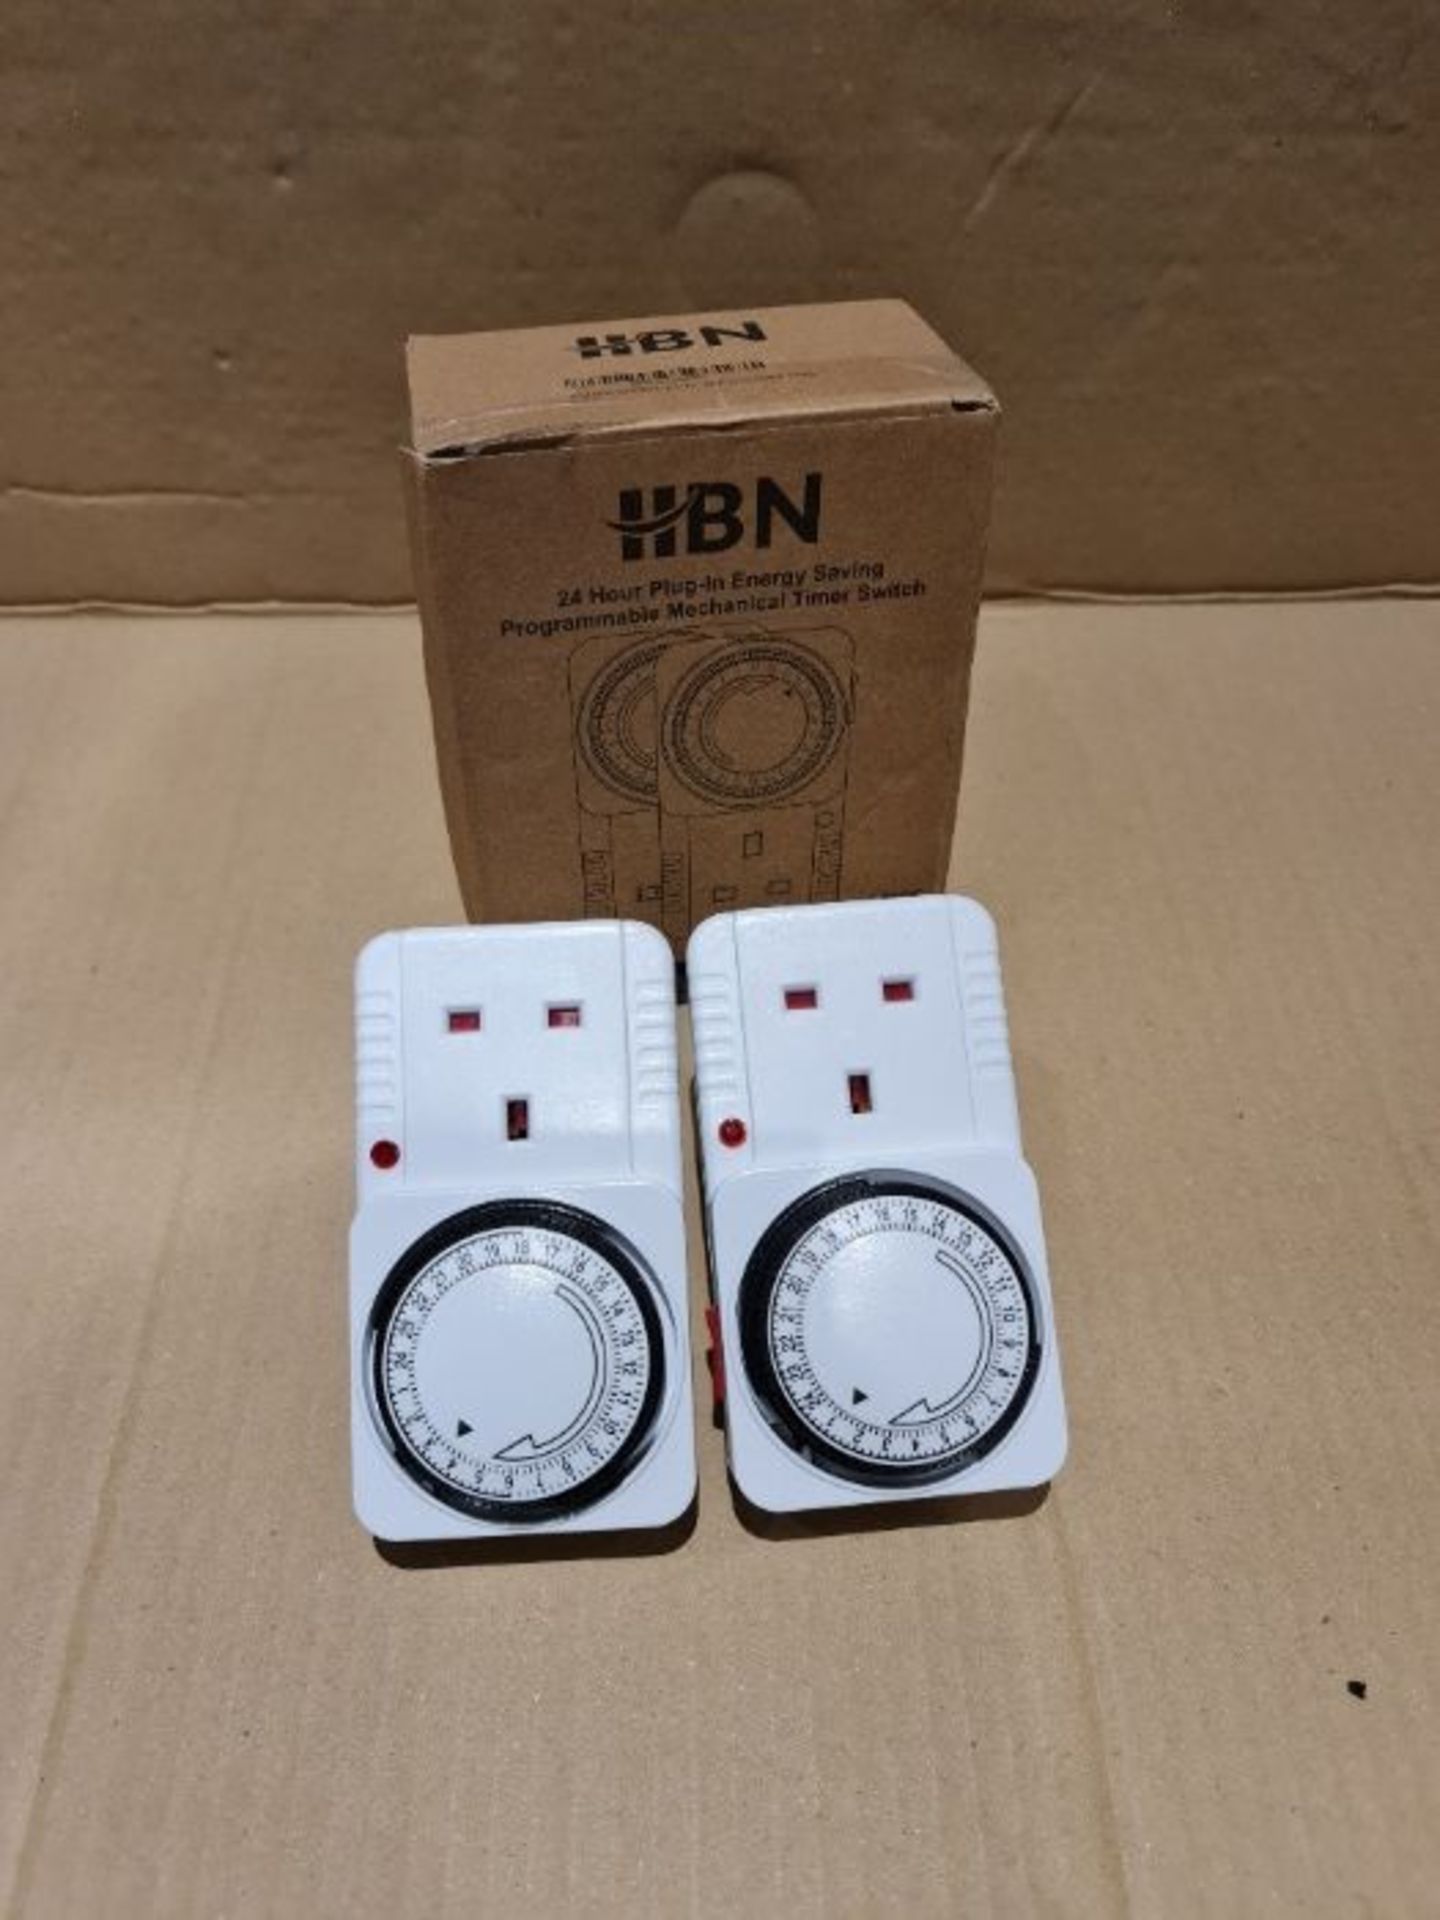 HBN BND-50/E39 Plug-in Energy Saving Programmable Mechanical Timer Switch 2 Pack - Image 2 of 2